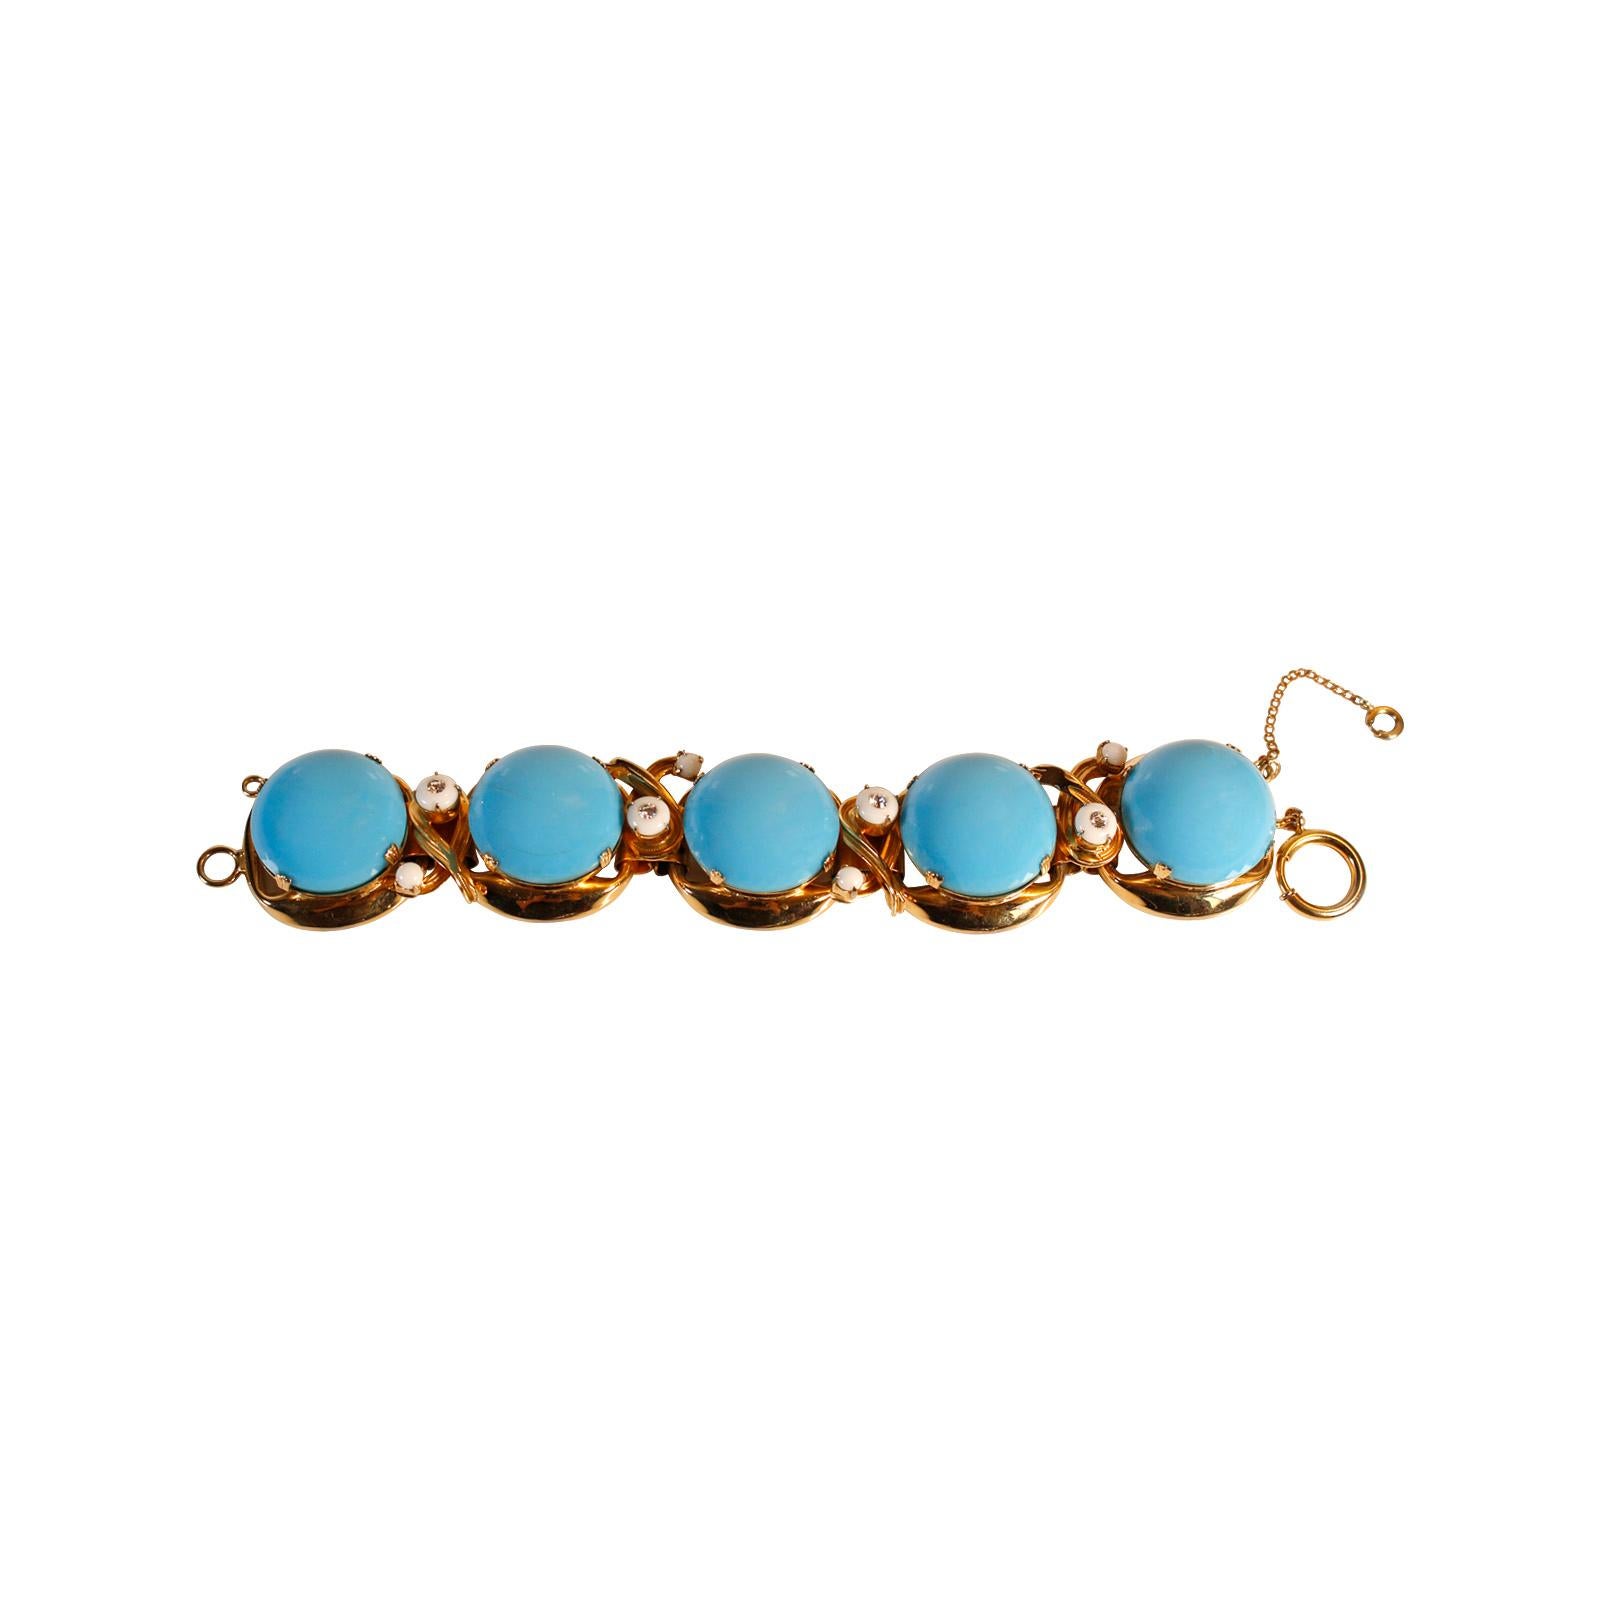 Vintage Unsigned Gold and Faux Turquoise Bracelet Circa 1960s For Sale 4